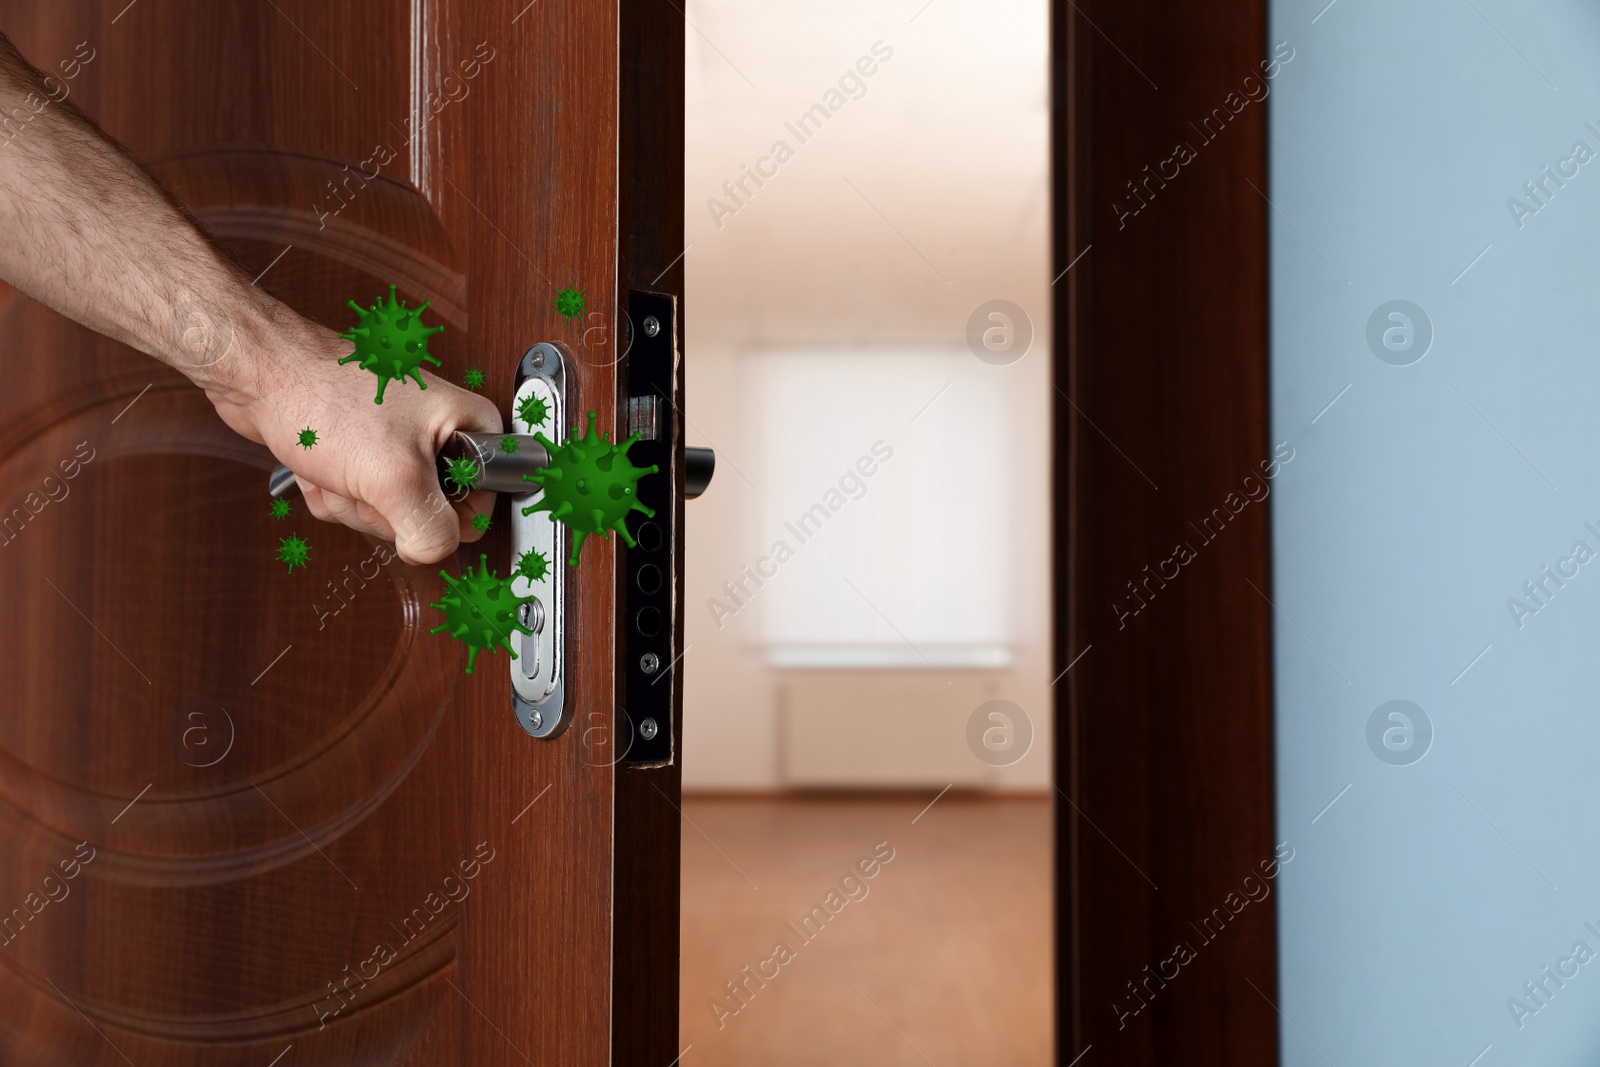 Image of Abstract illustration of virus and man opening wooden door, closeup. Avoid touching surfaces in public spaces during COVID-19 pandemic